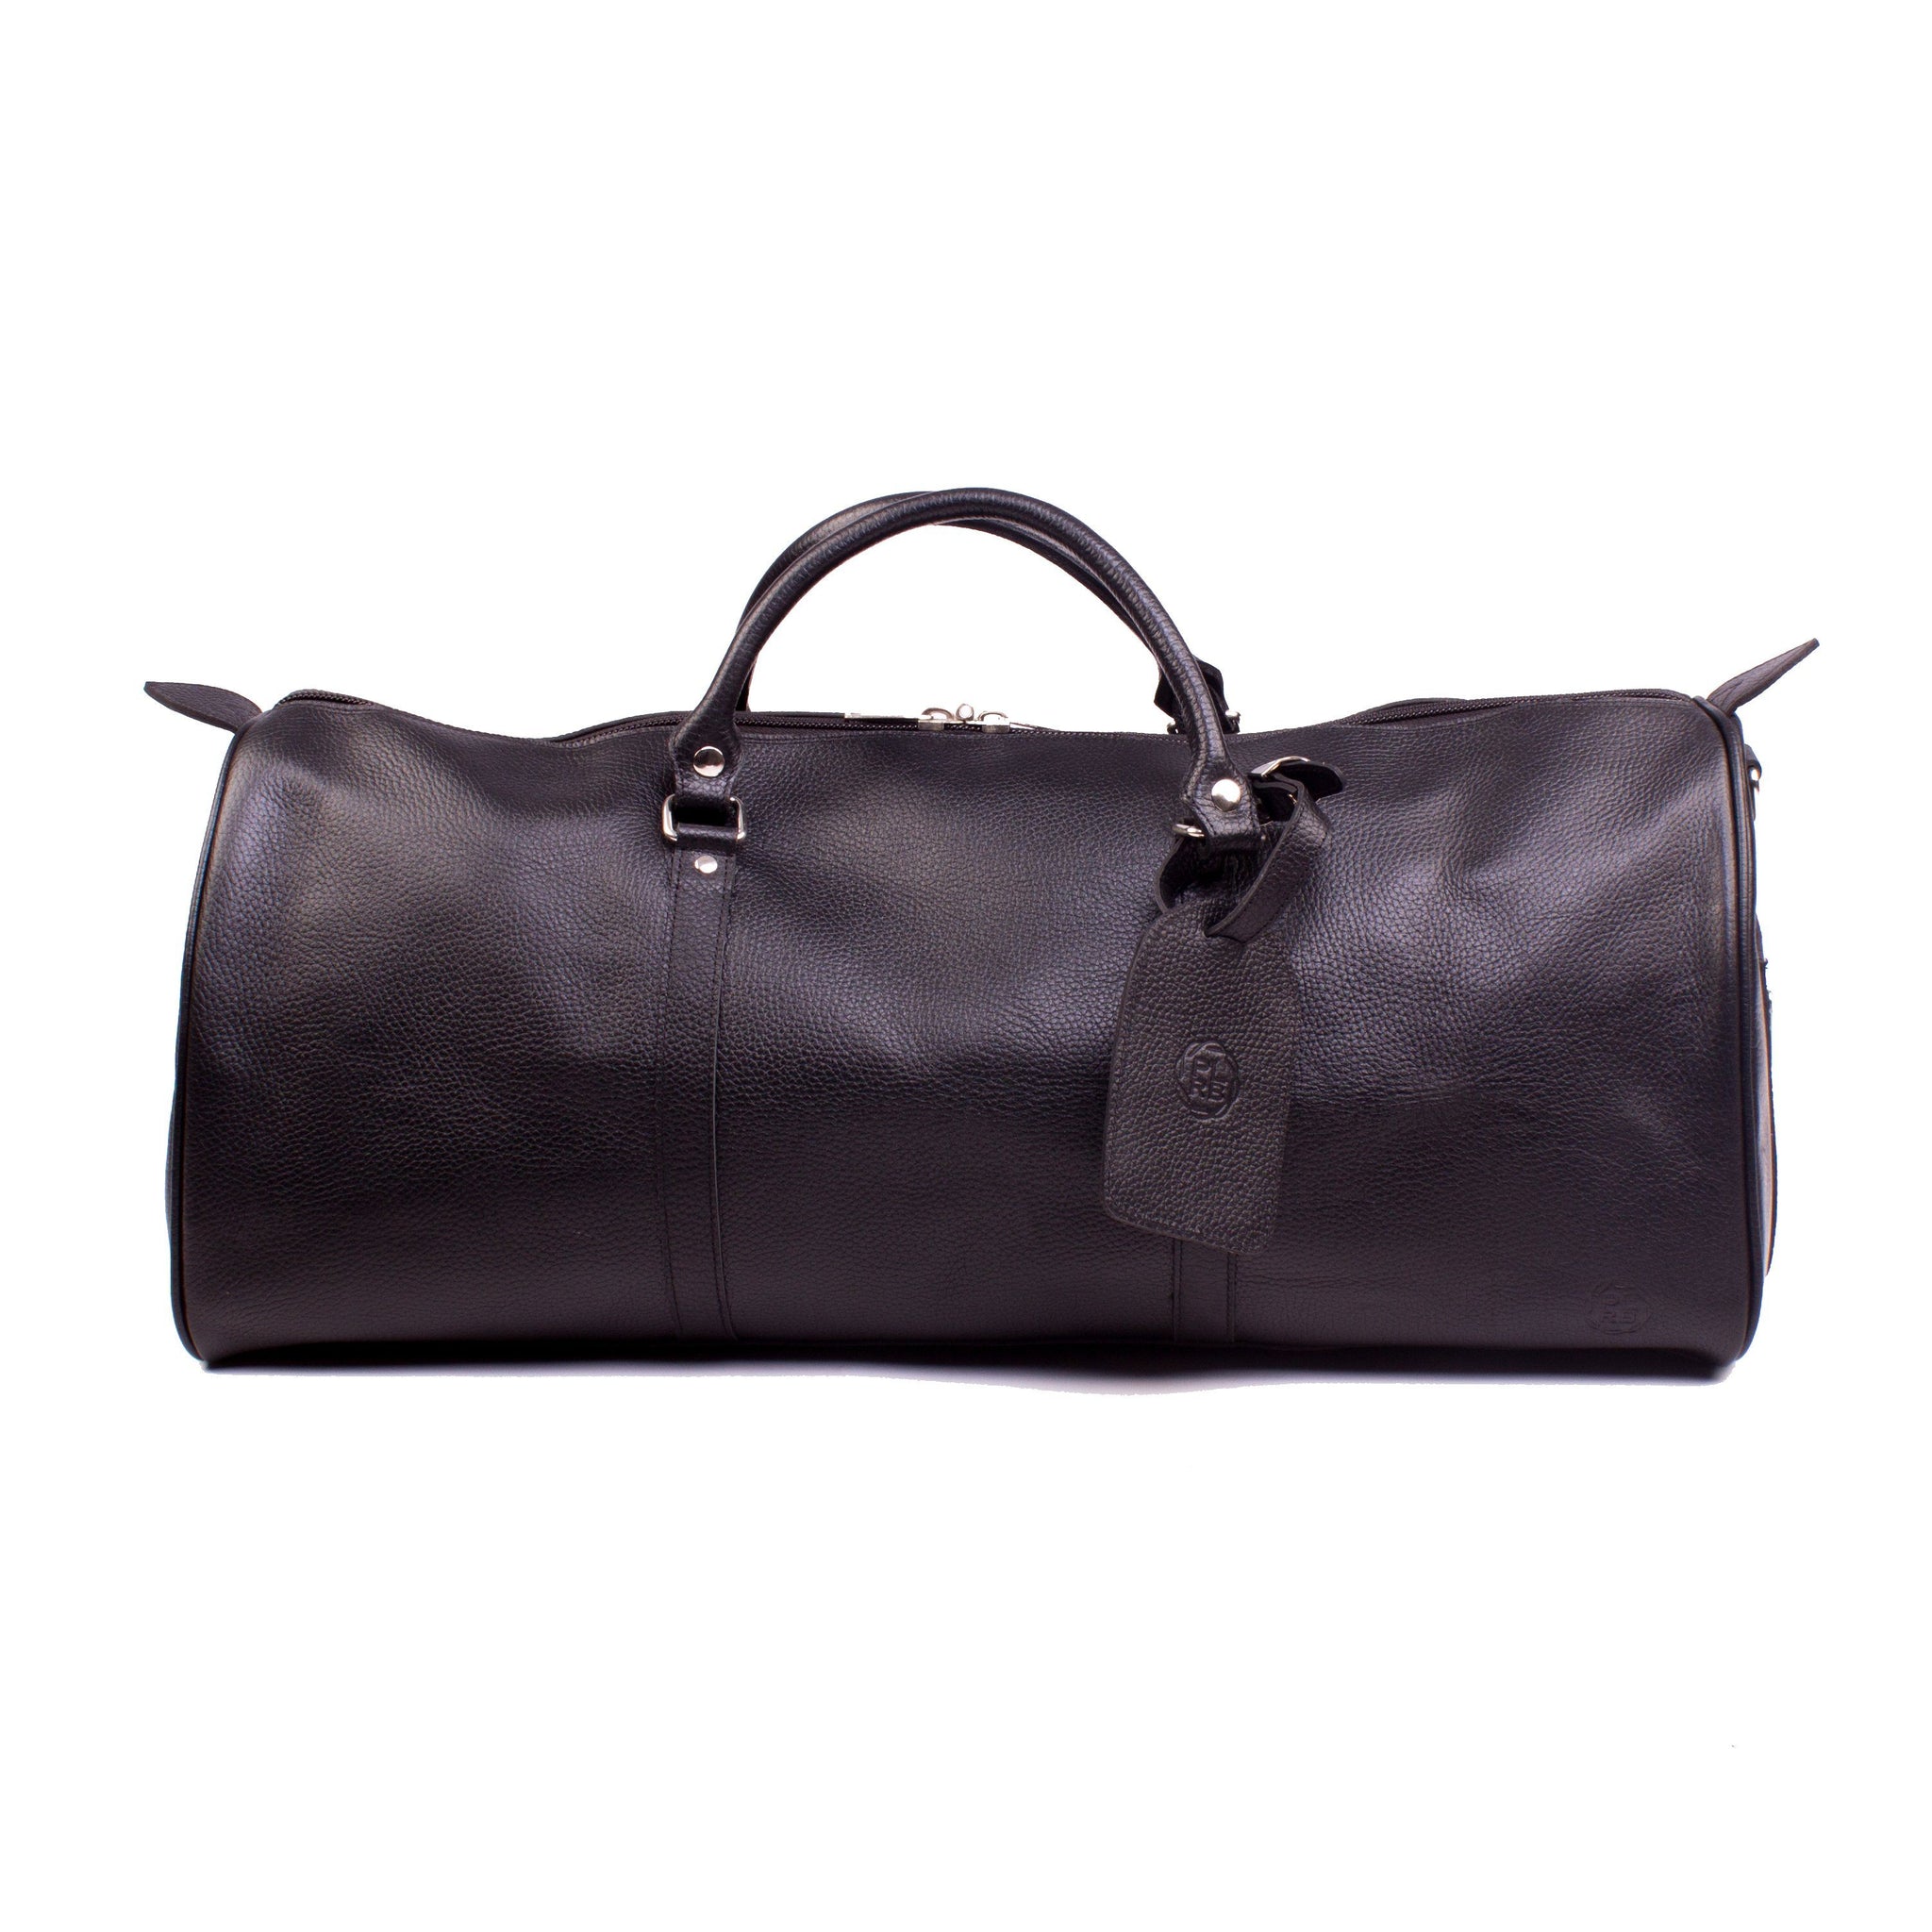 ONE NIGHTER BLACK LEATHER DUFFLE BAG | Poor Little Rich Boy Clothing